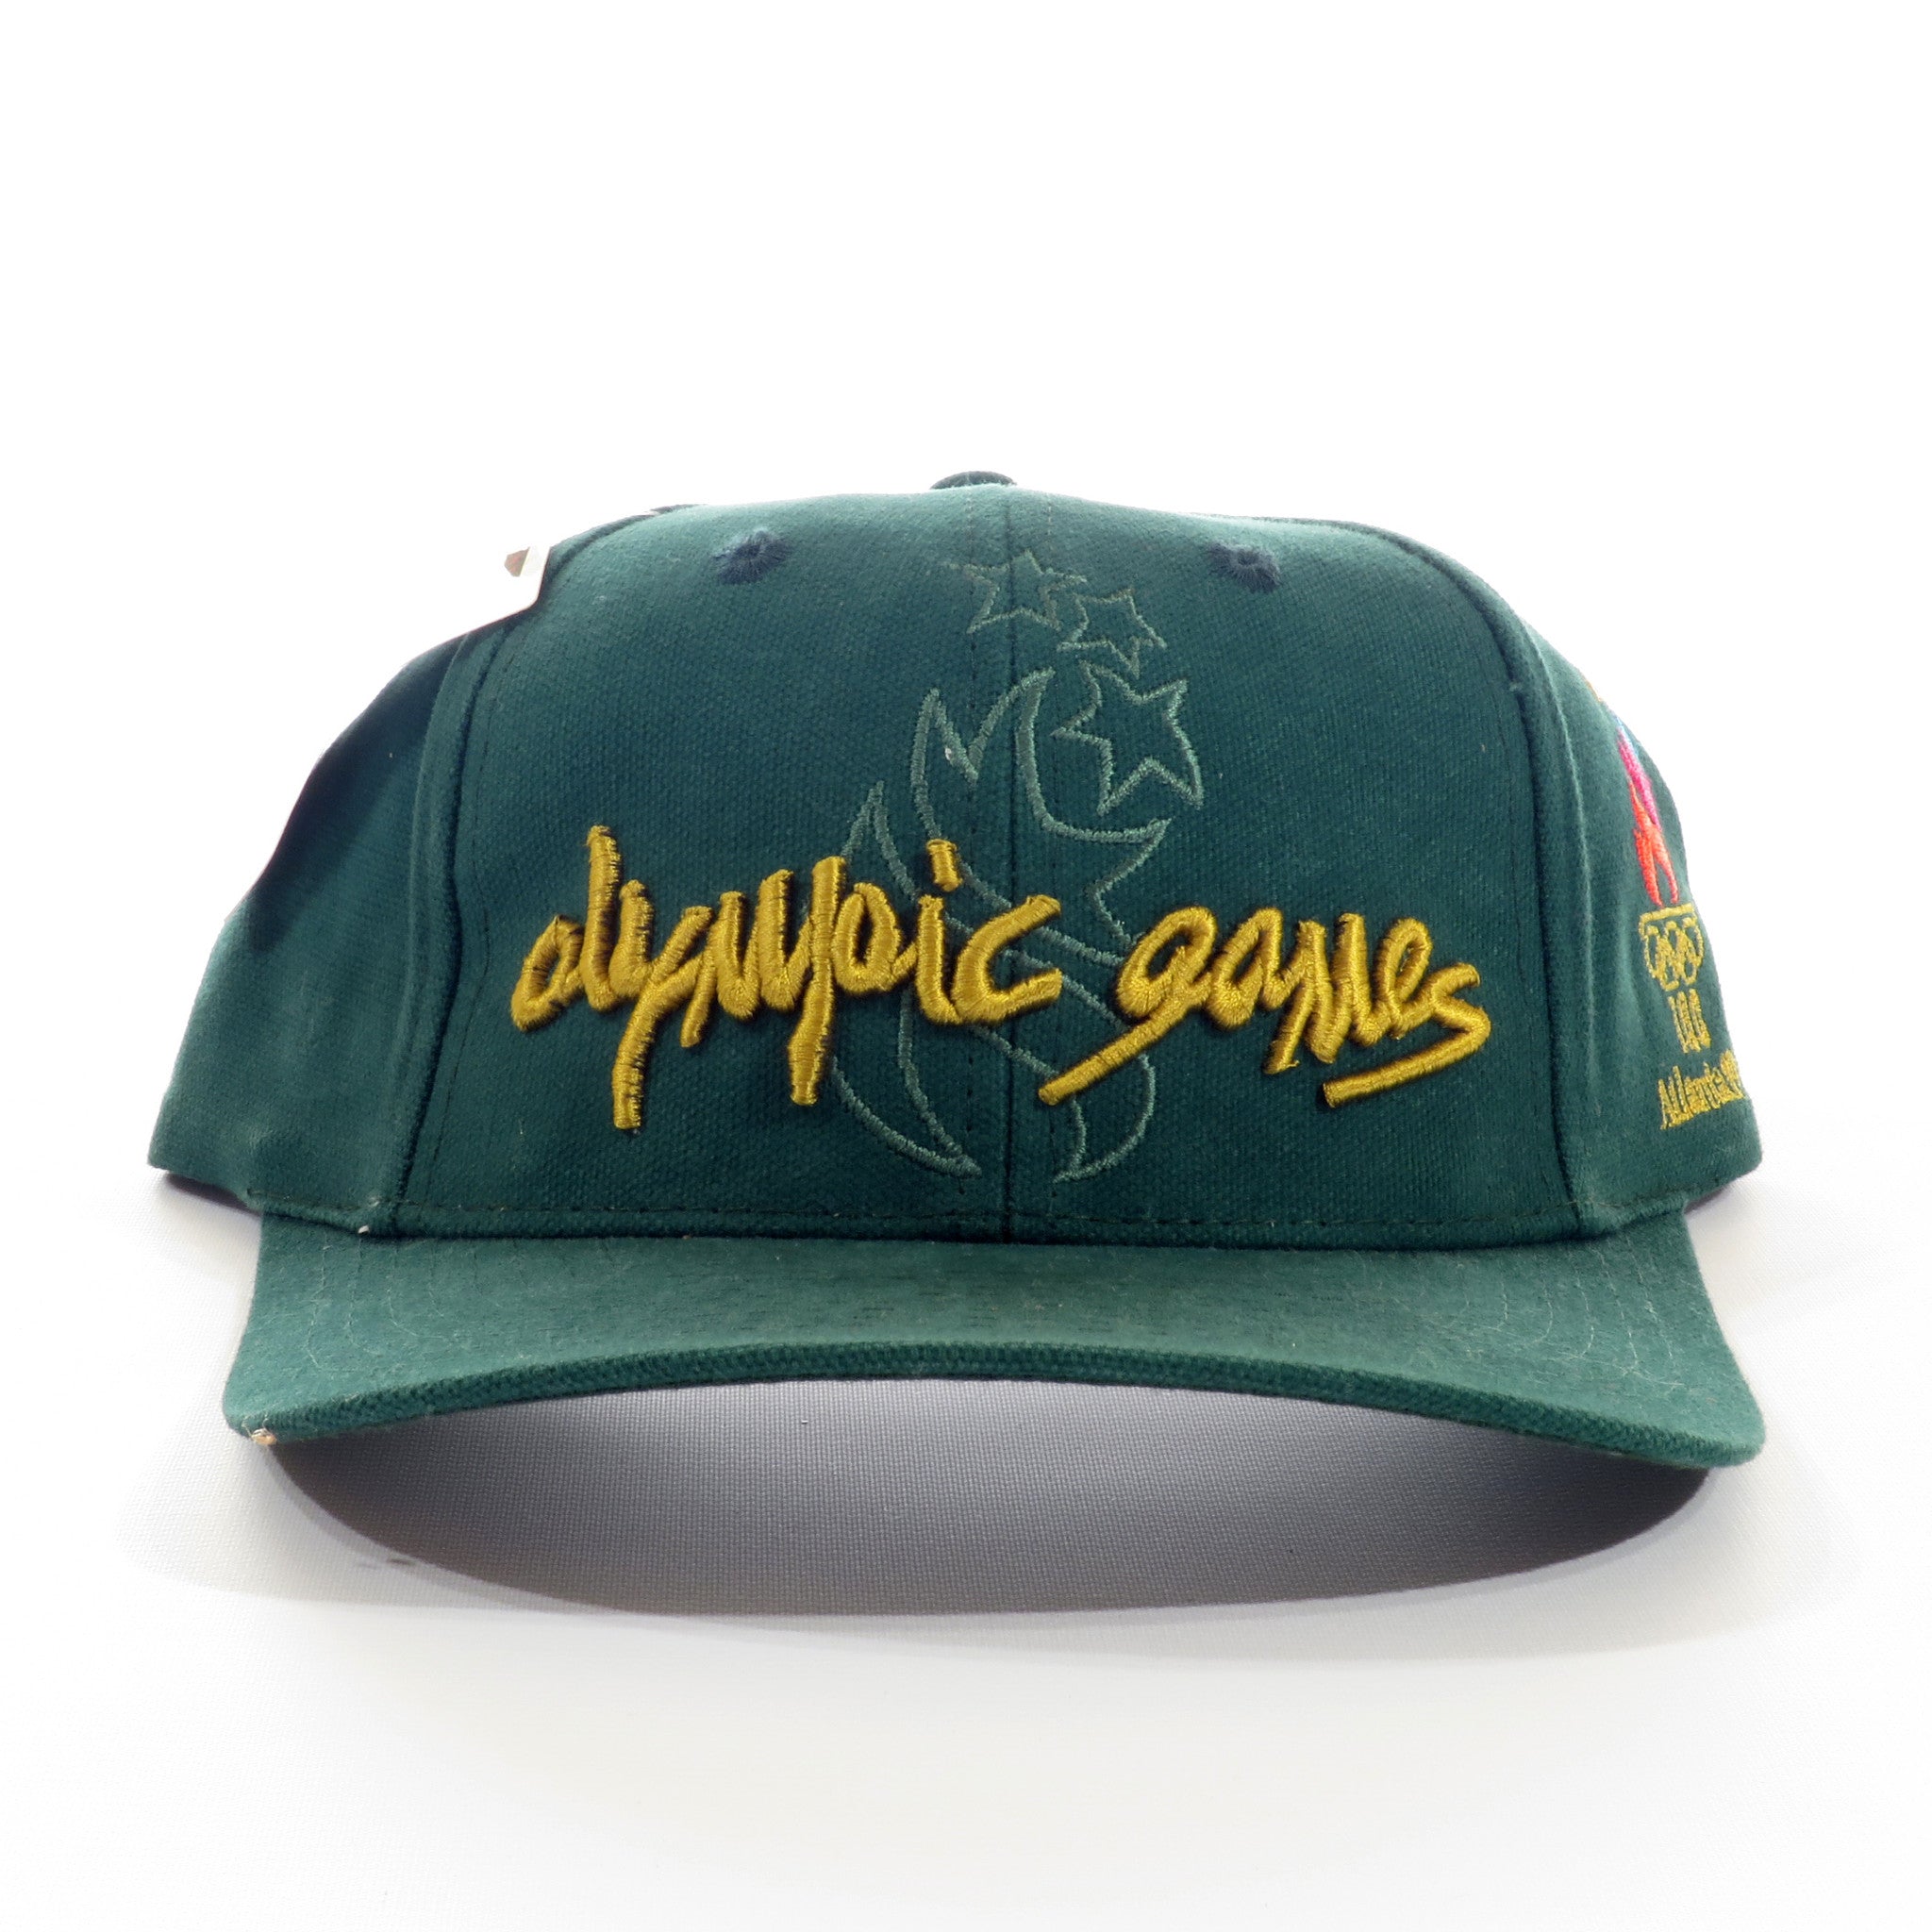 1996 Summer Olympics The Game Snapback Hat